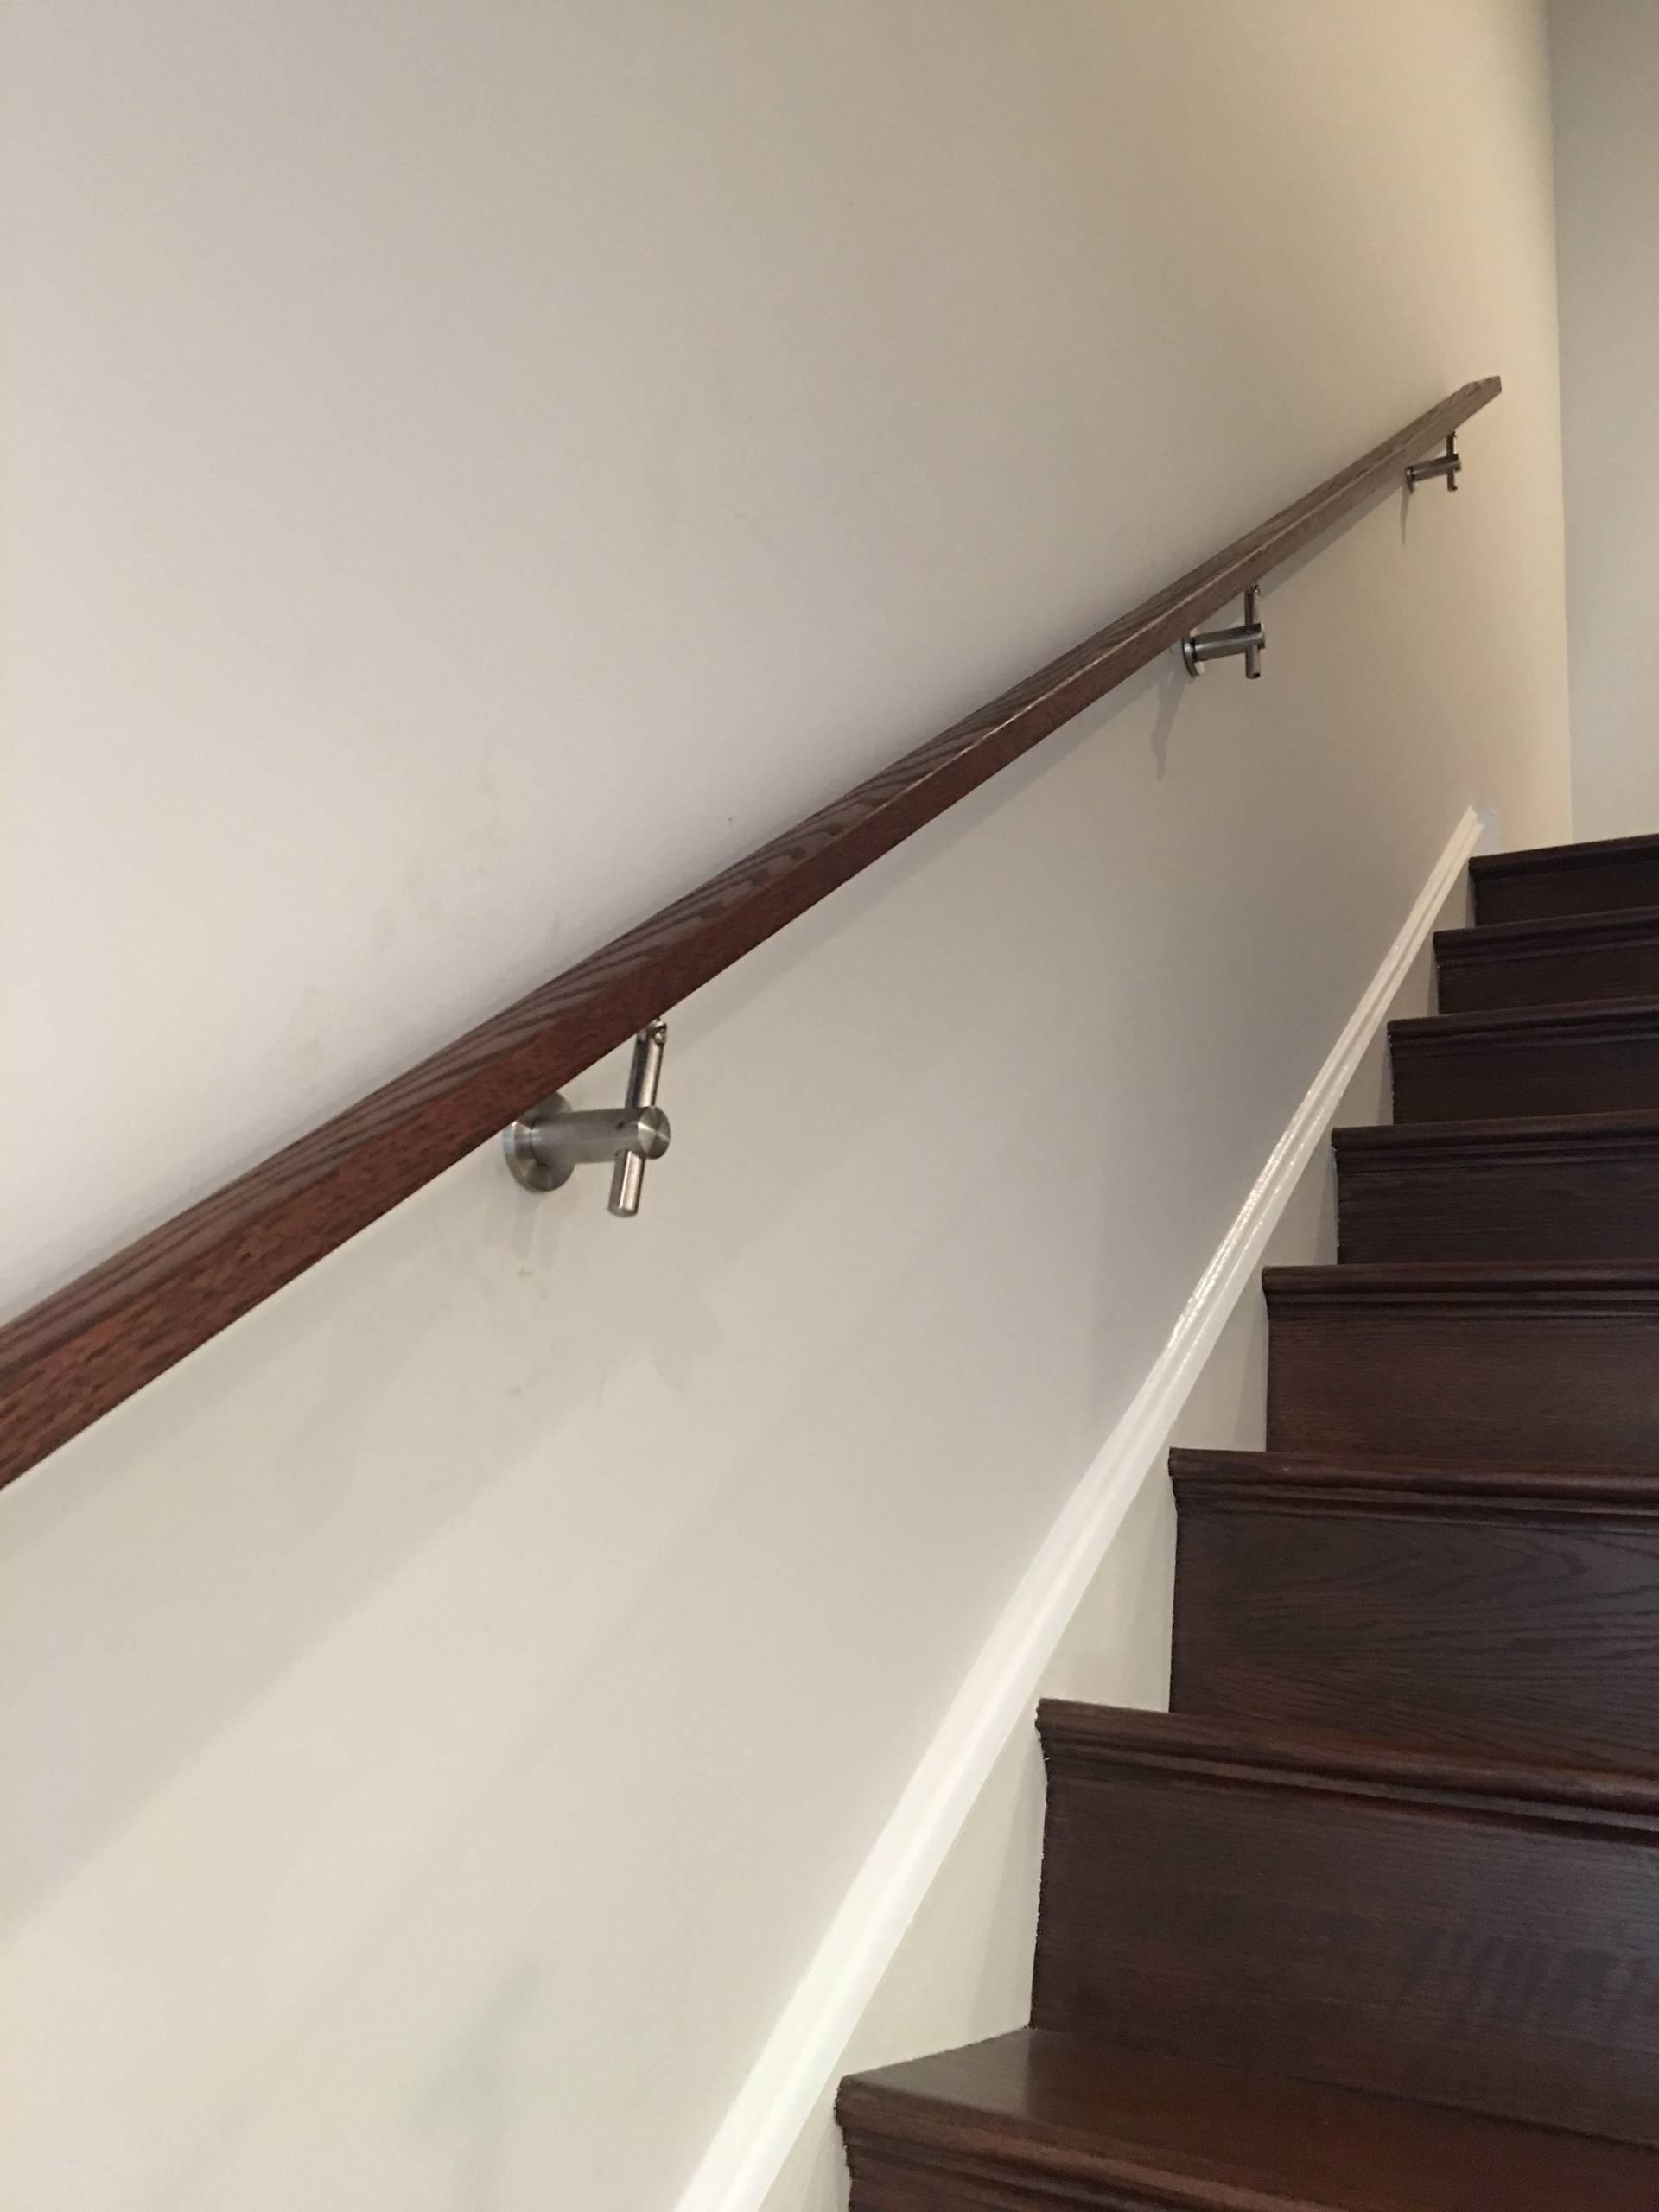 Staircase Wall Mounted Handrail Ideas los angeles 2022